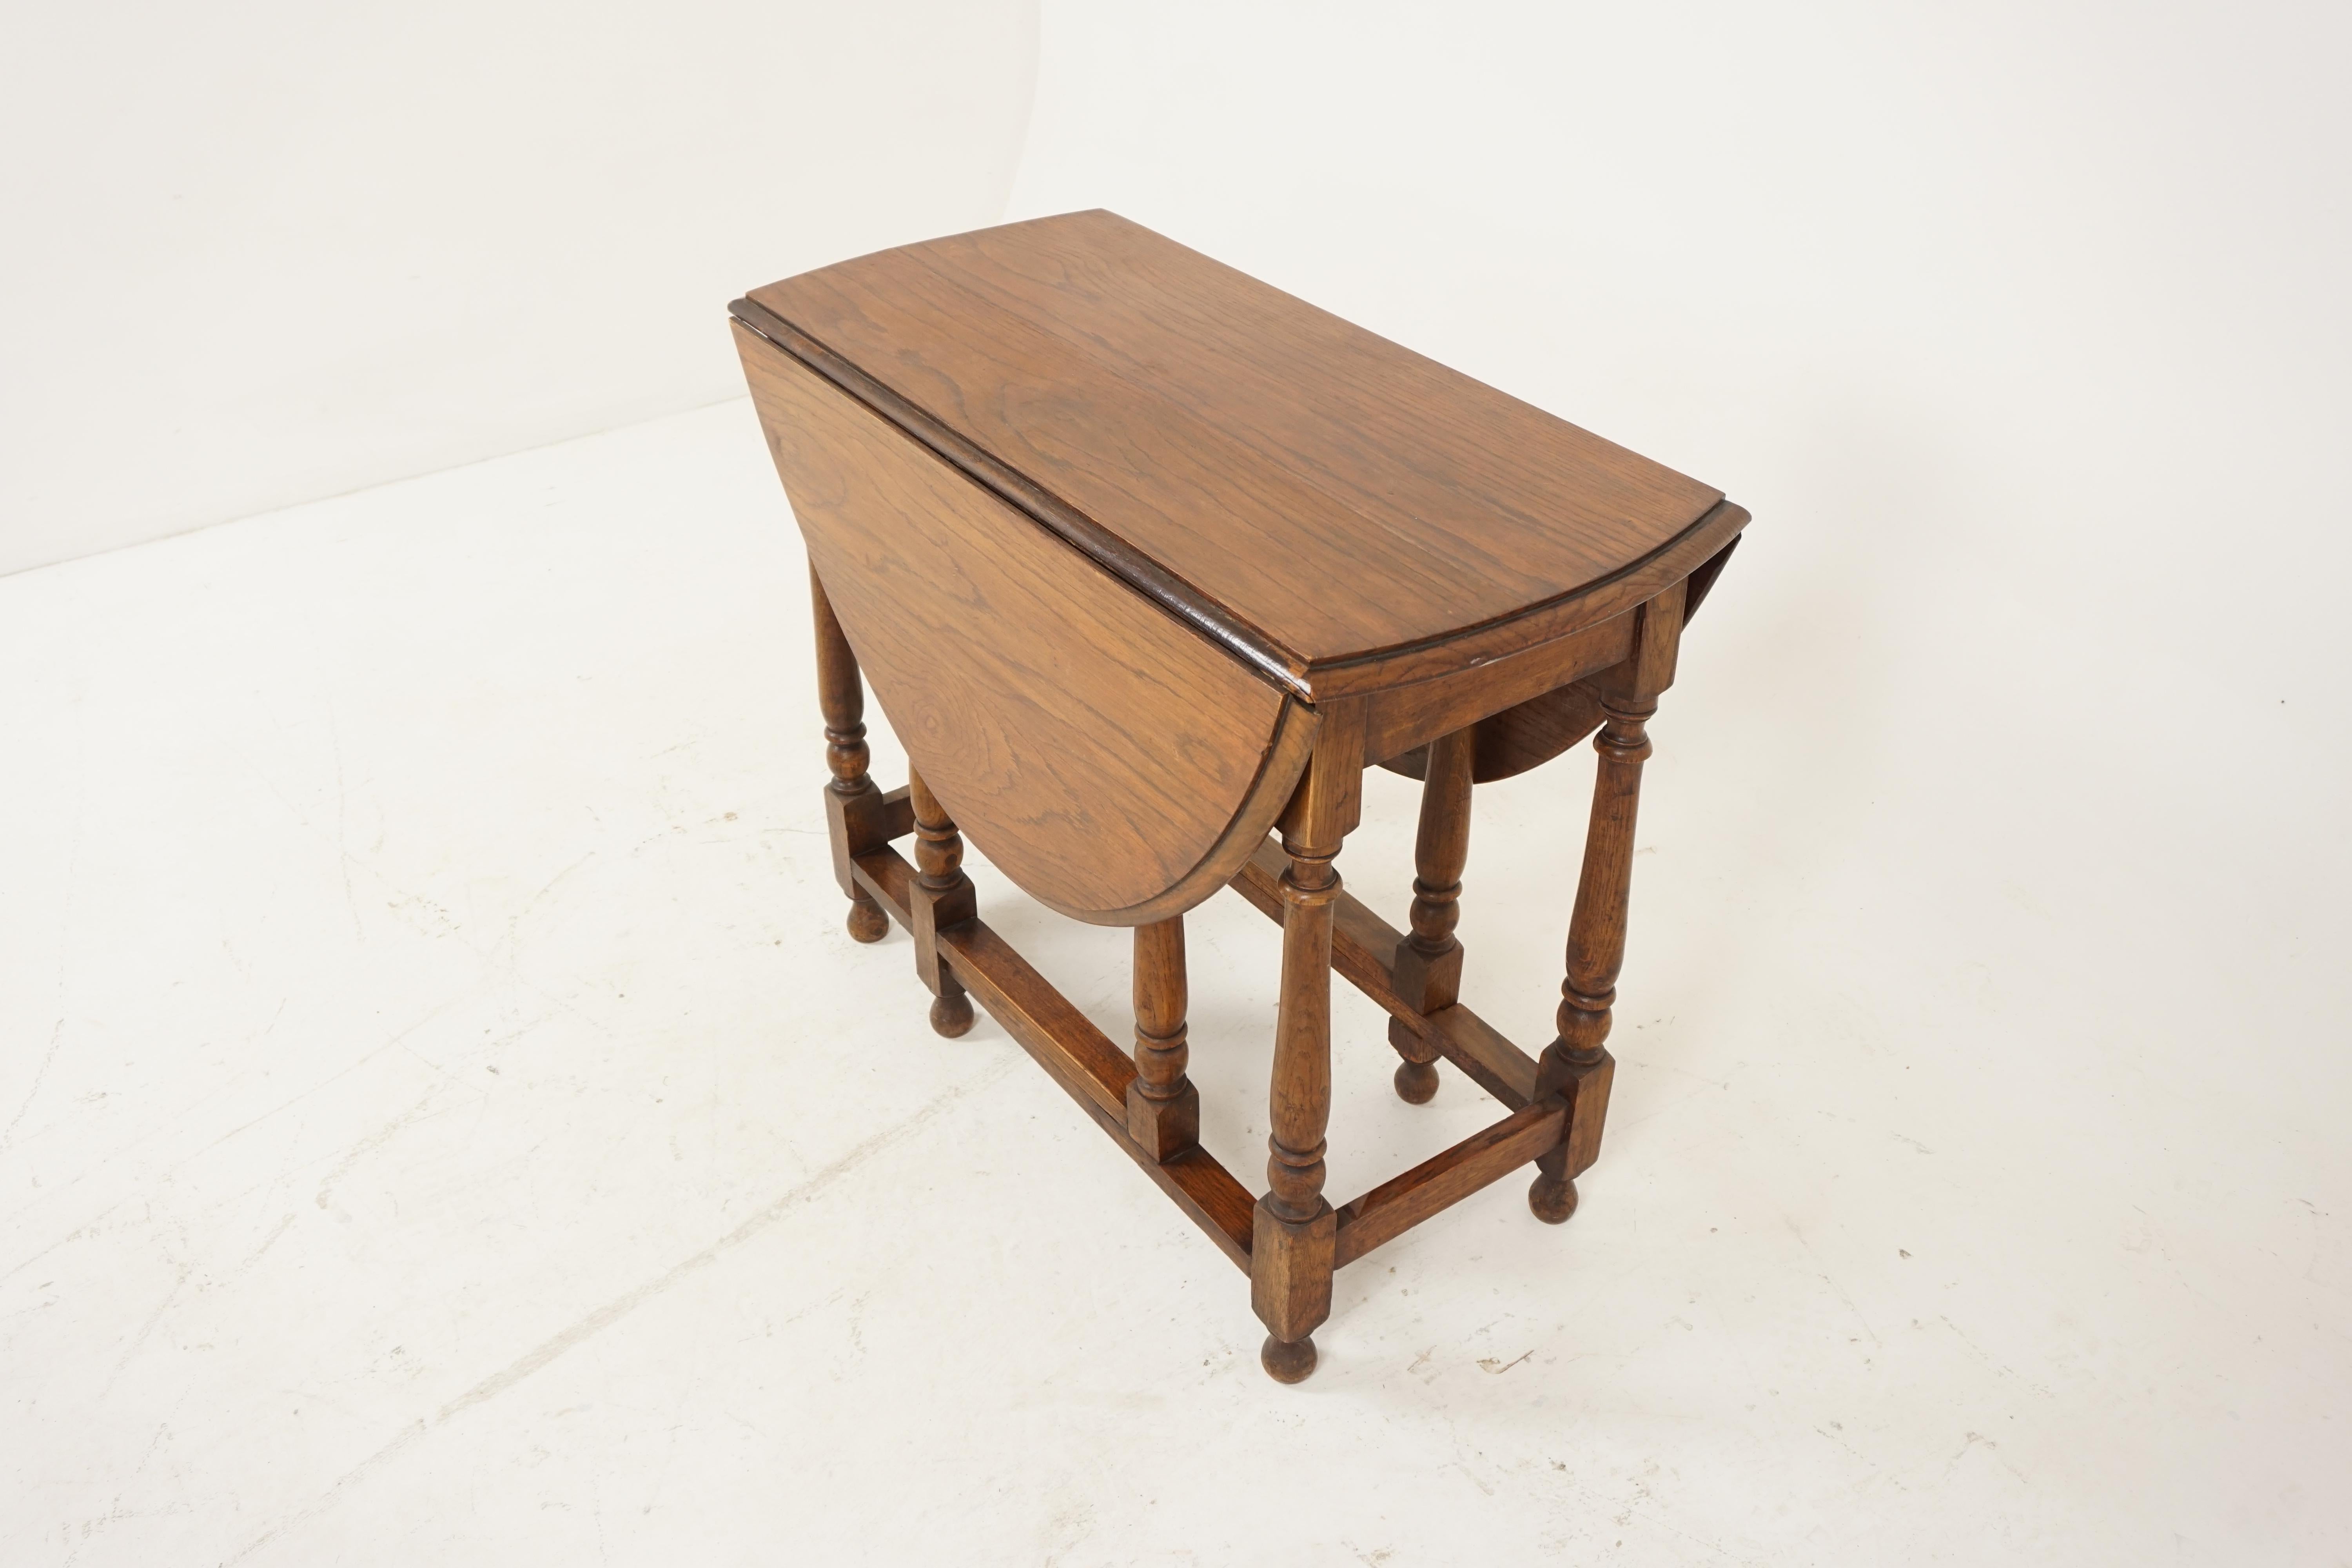 Antique gateleg table, oak, oval drop leaf table, Scotland 1920, B2081

Scotland 1920
Solid oak construction
Original finish
Moulded rectangular top
Two oval drop leaves to the sides
Ending on thick turned legs
Connected by cross